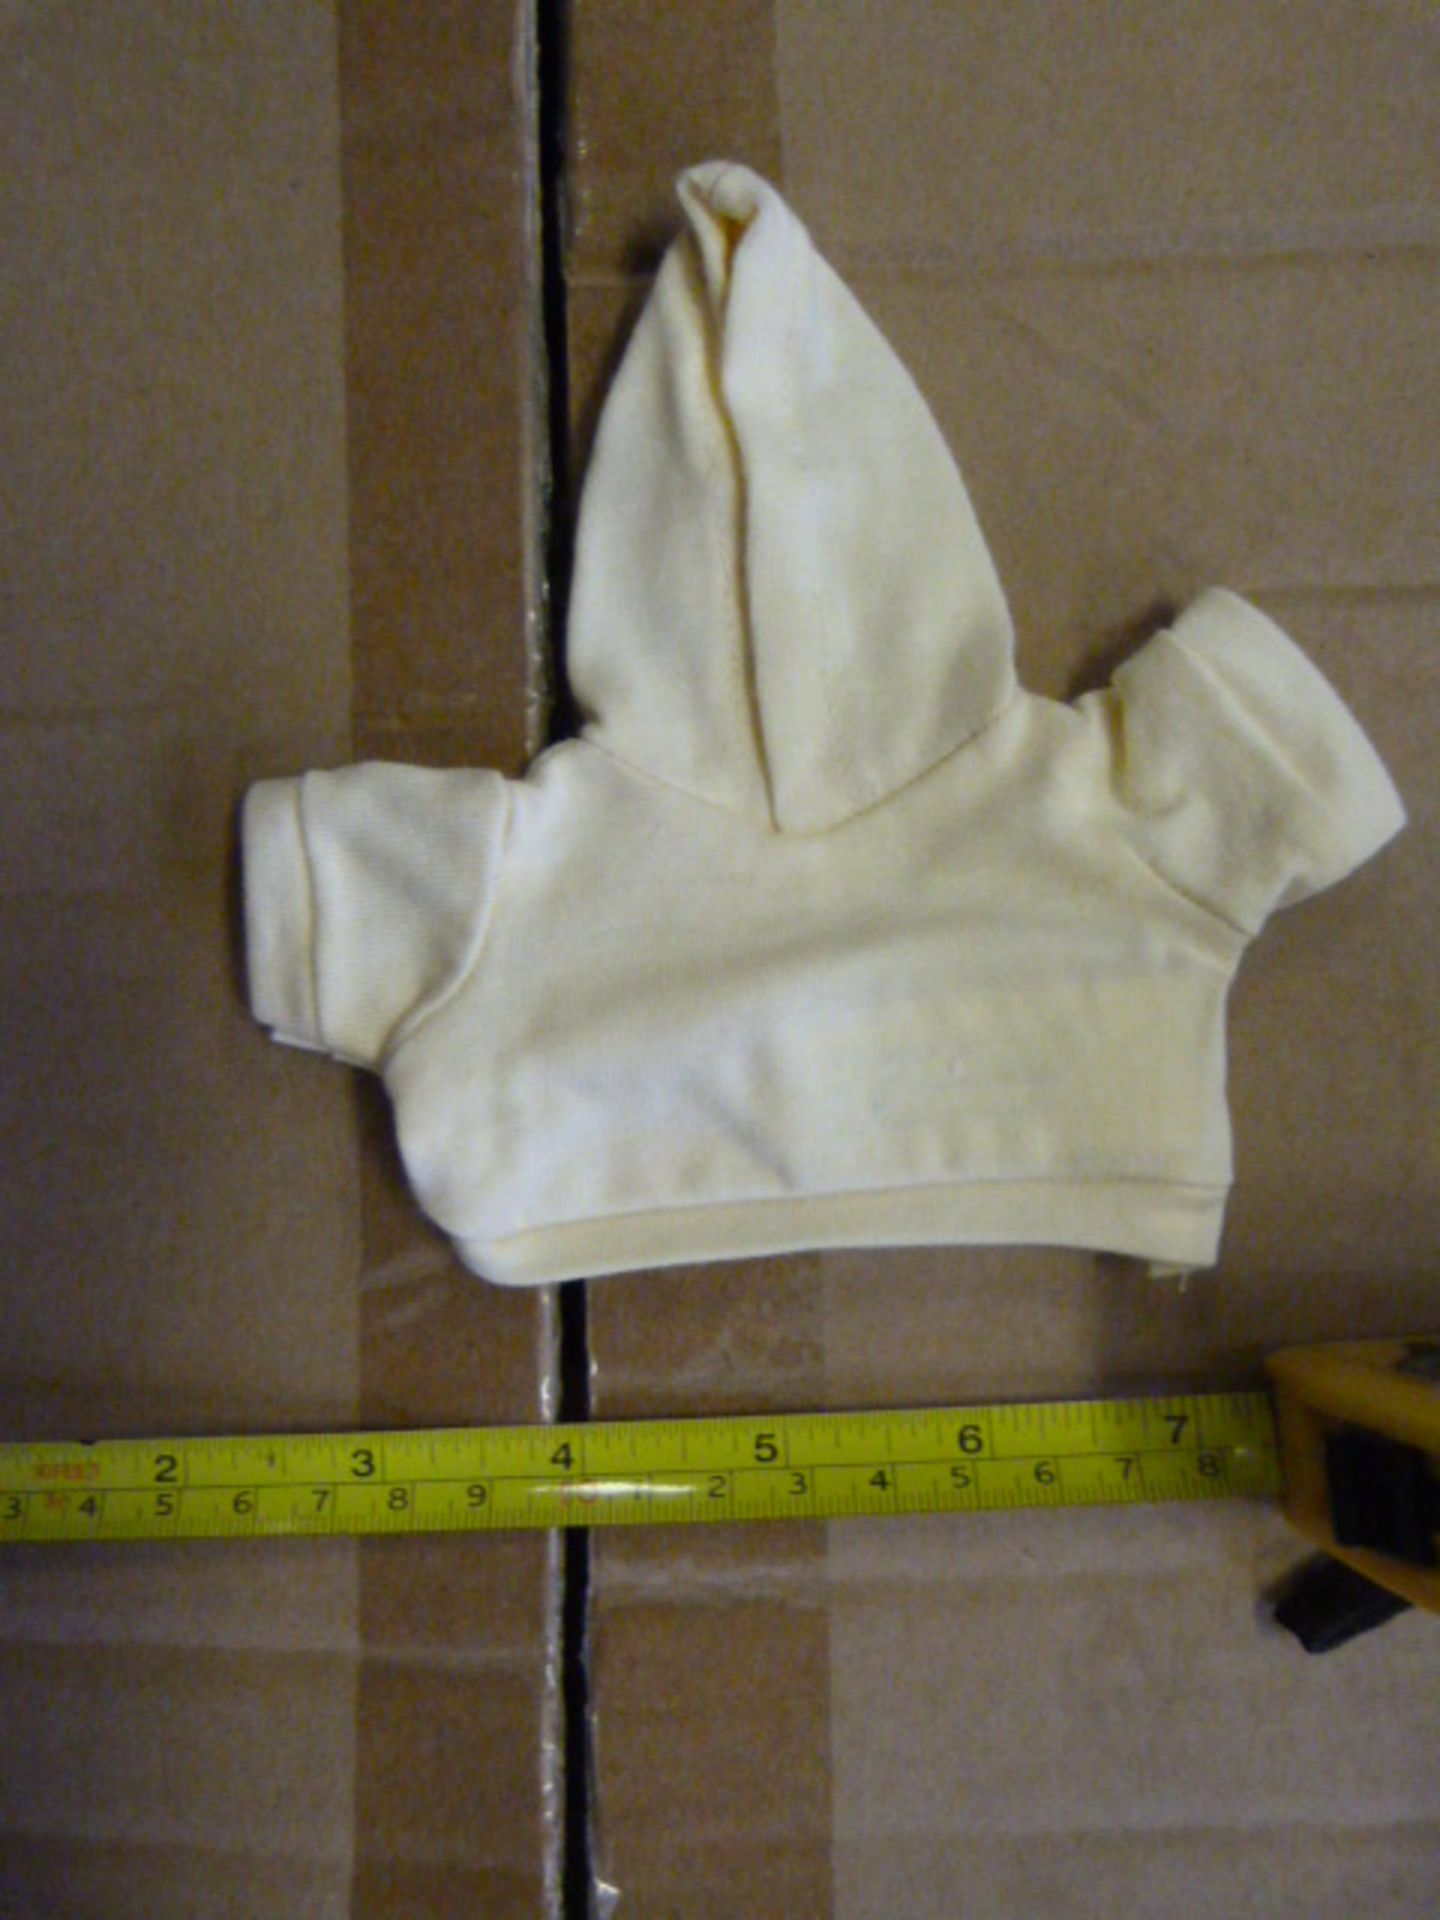 Box of 500 Small Cream Hoodies for Teddies and Dol